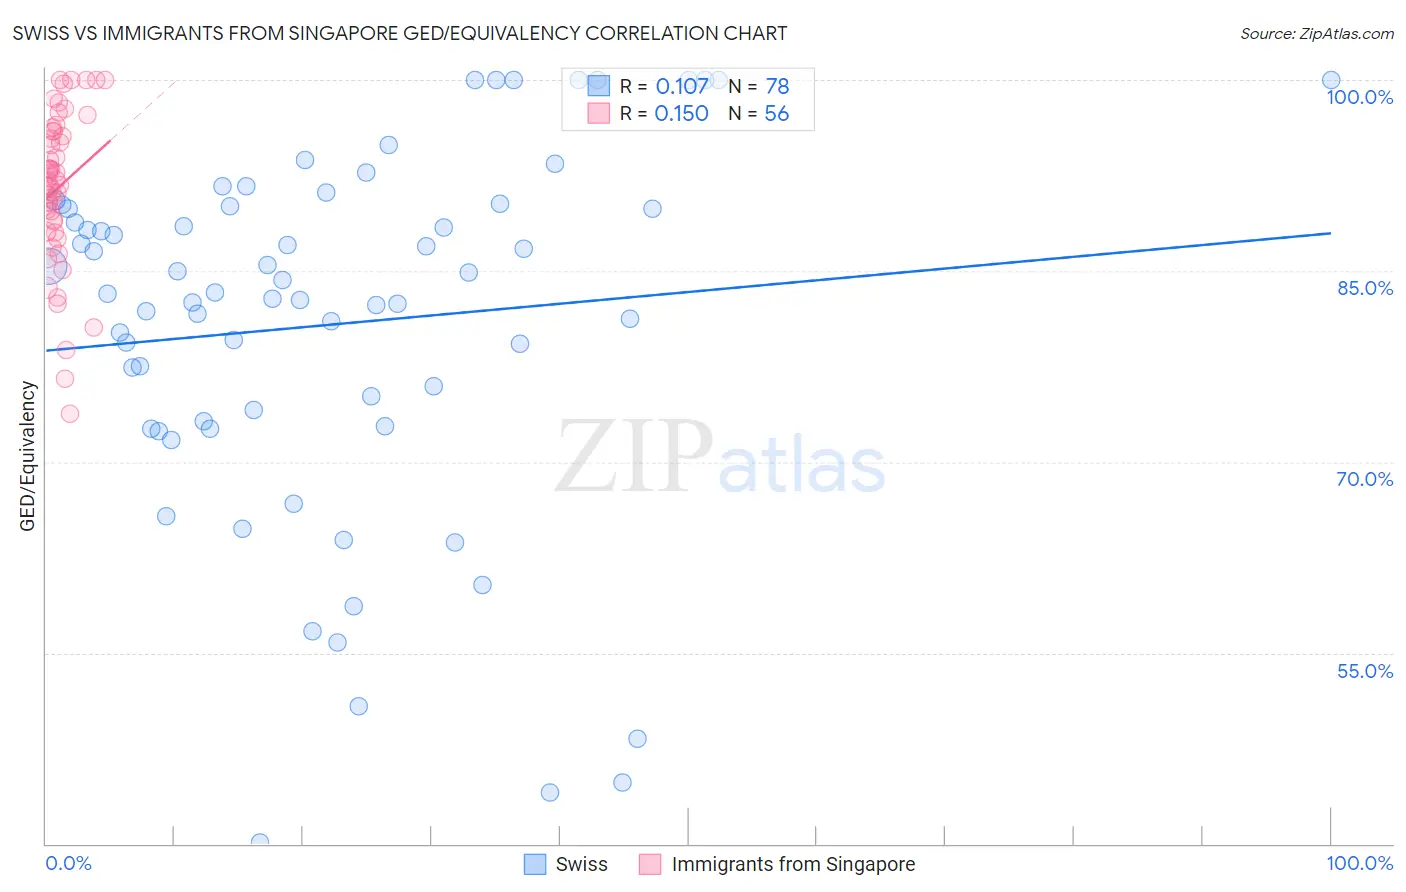 Swiss vs Immigrants from Singapore GED/Equivalency